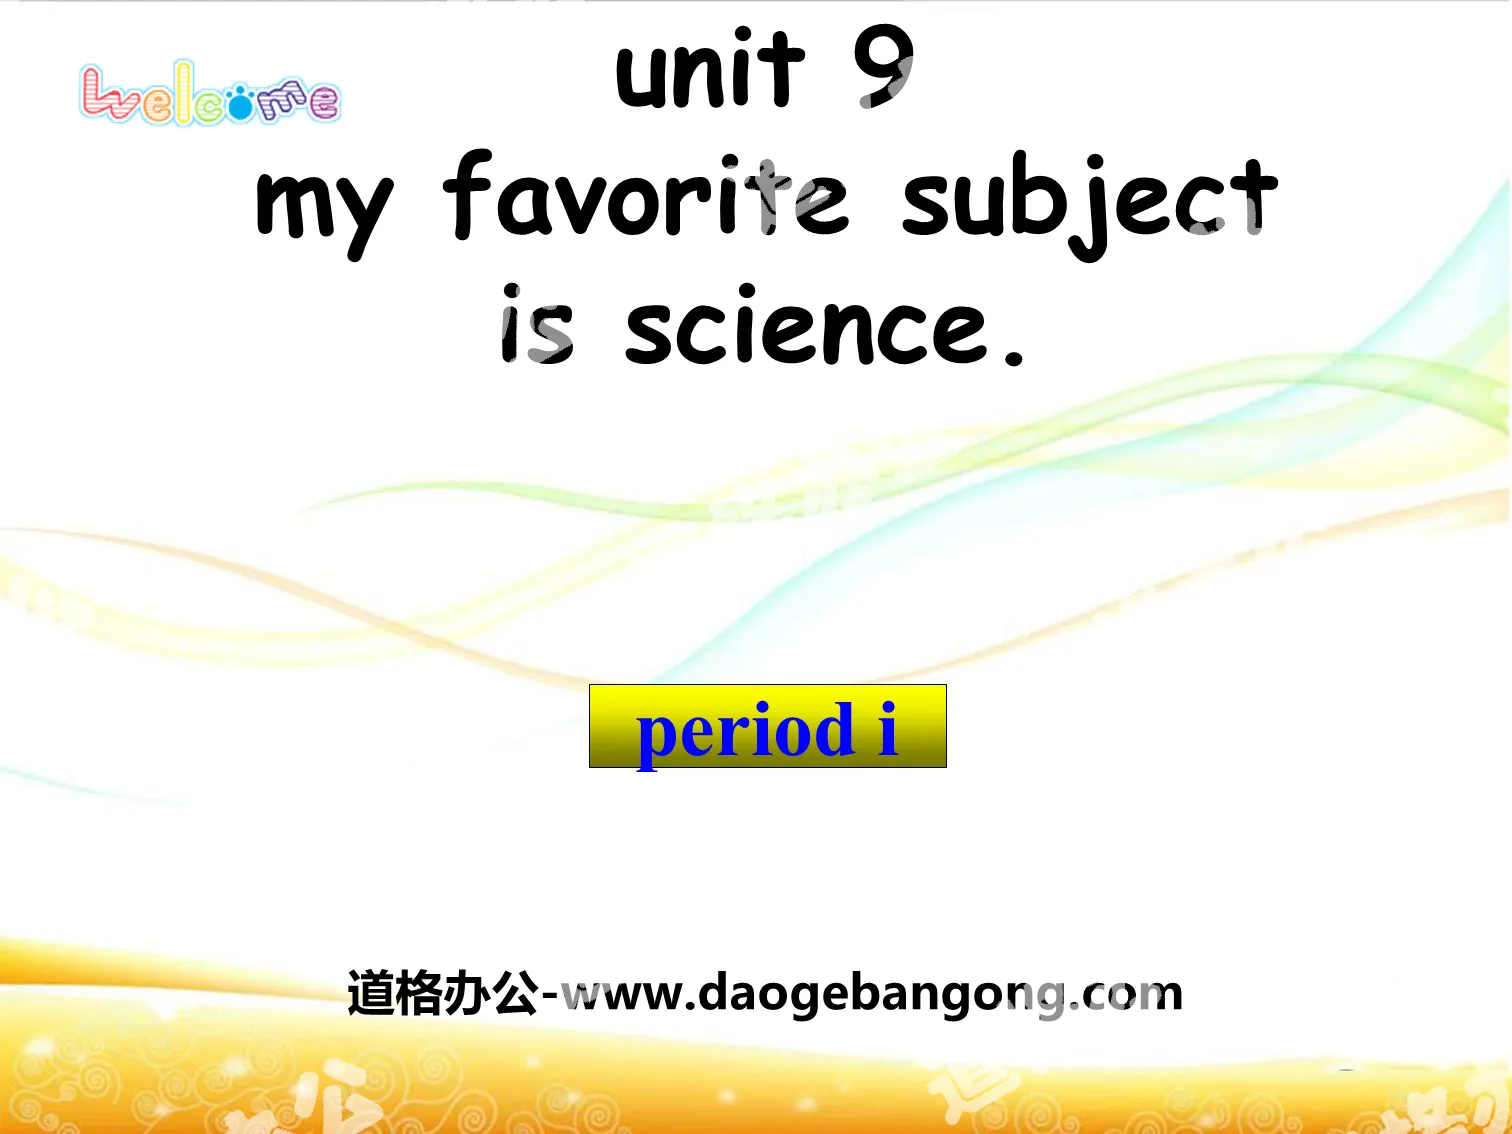 "My favorite subject is science" PPT courseware 5